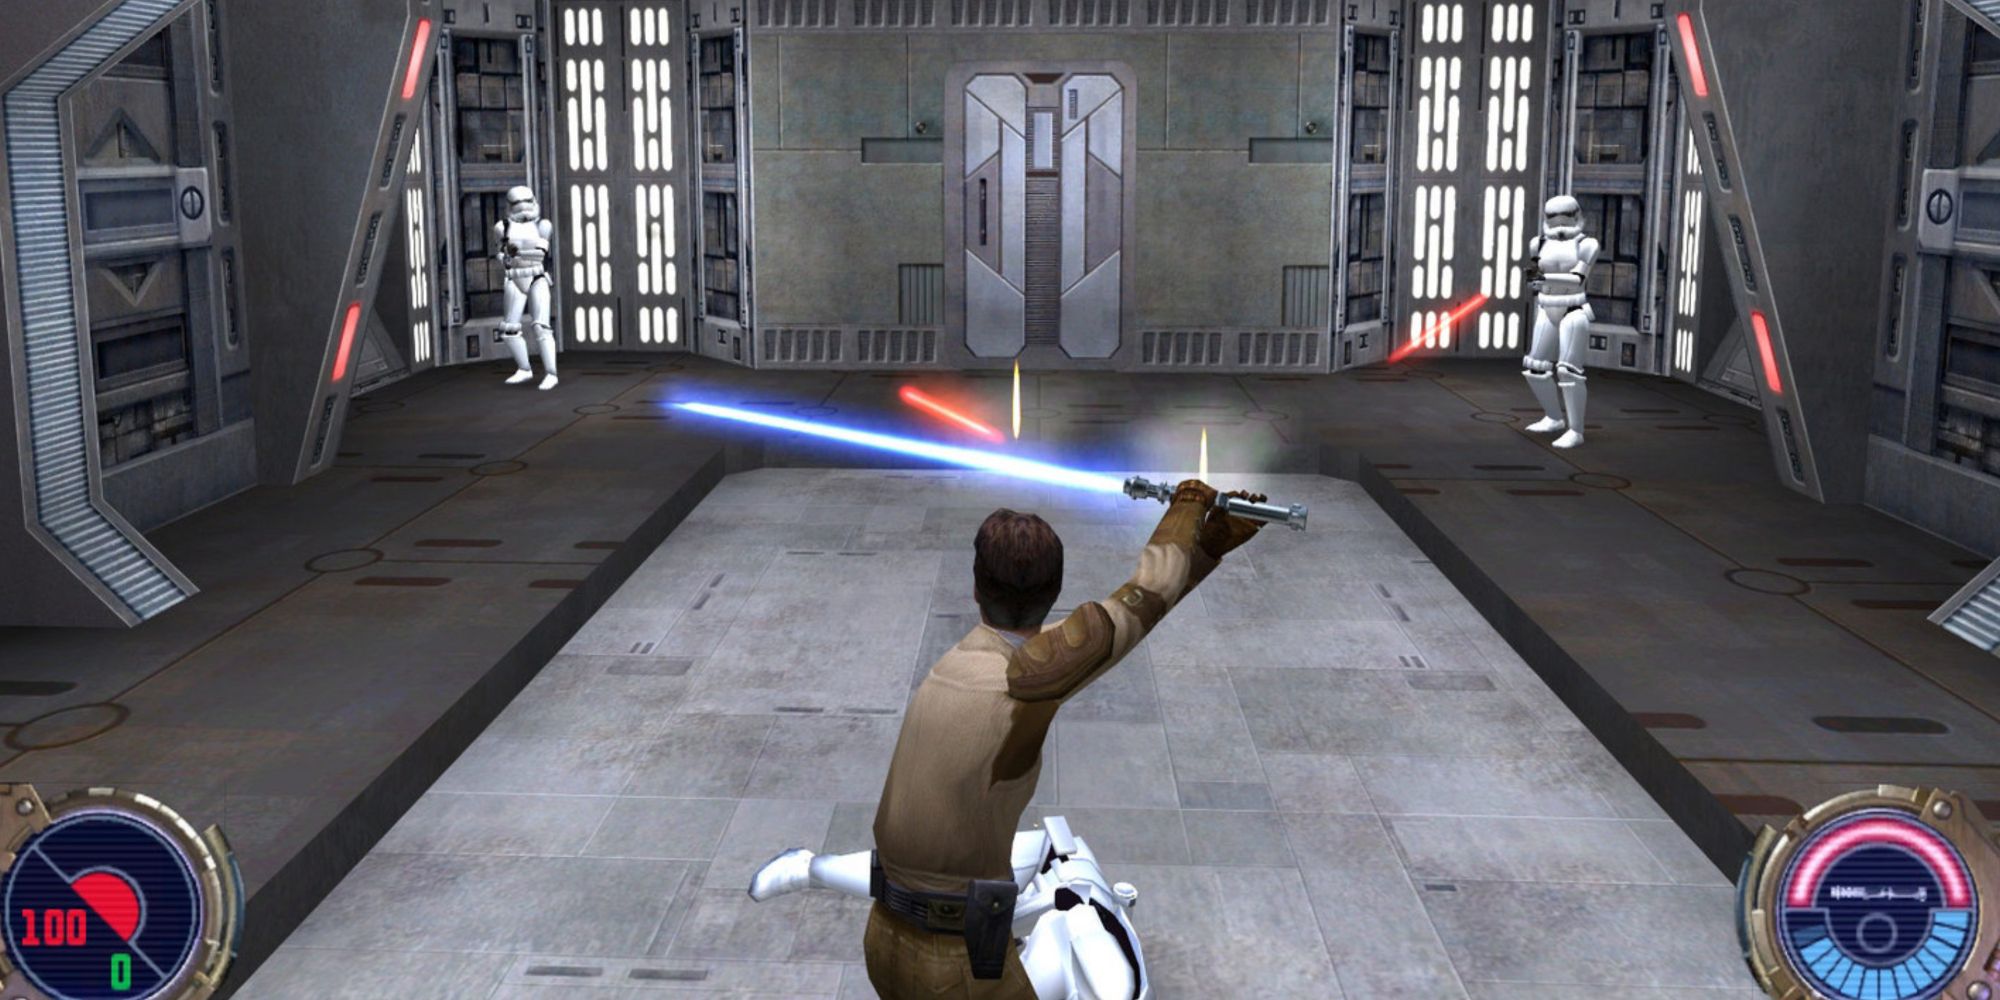 Kyle Katarn deflecting laser blasts from two stormtroopers in Star Wars Jedi Knight II Jedi Outcast